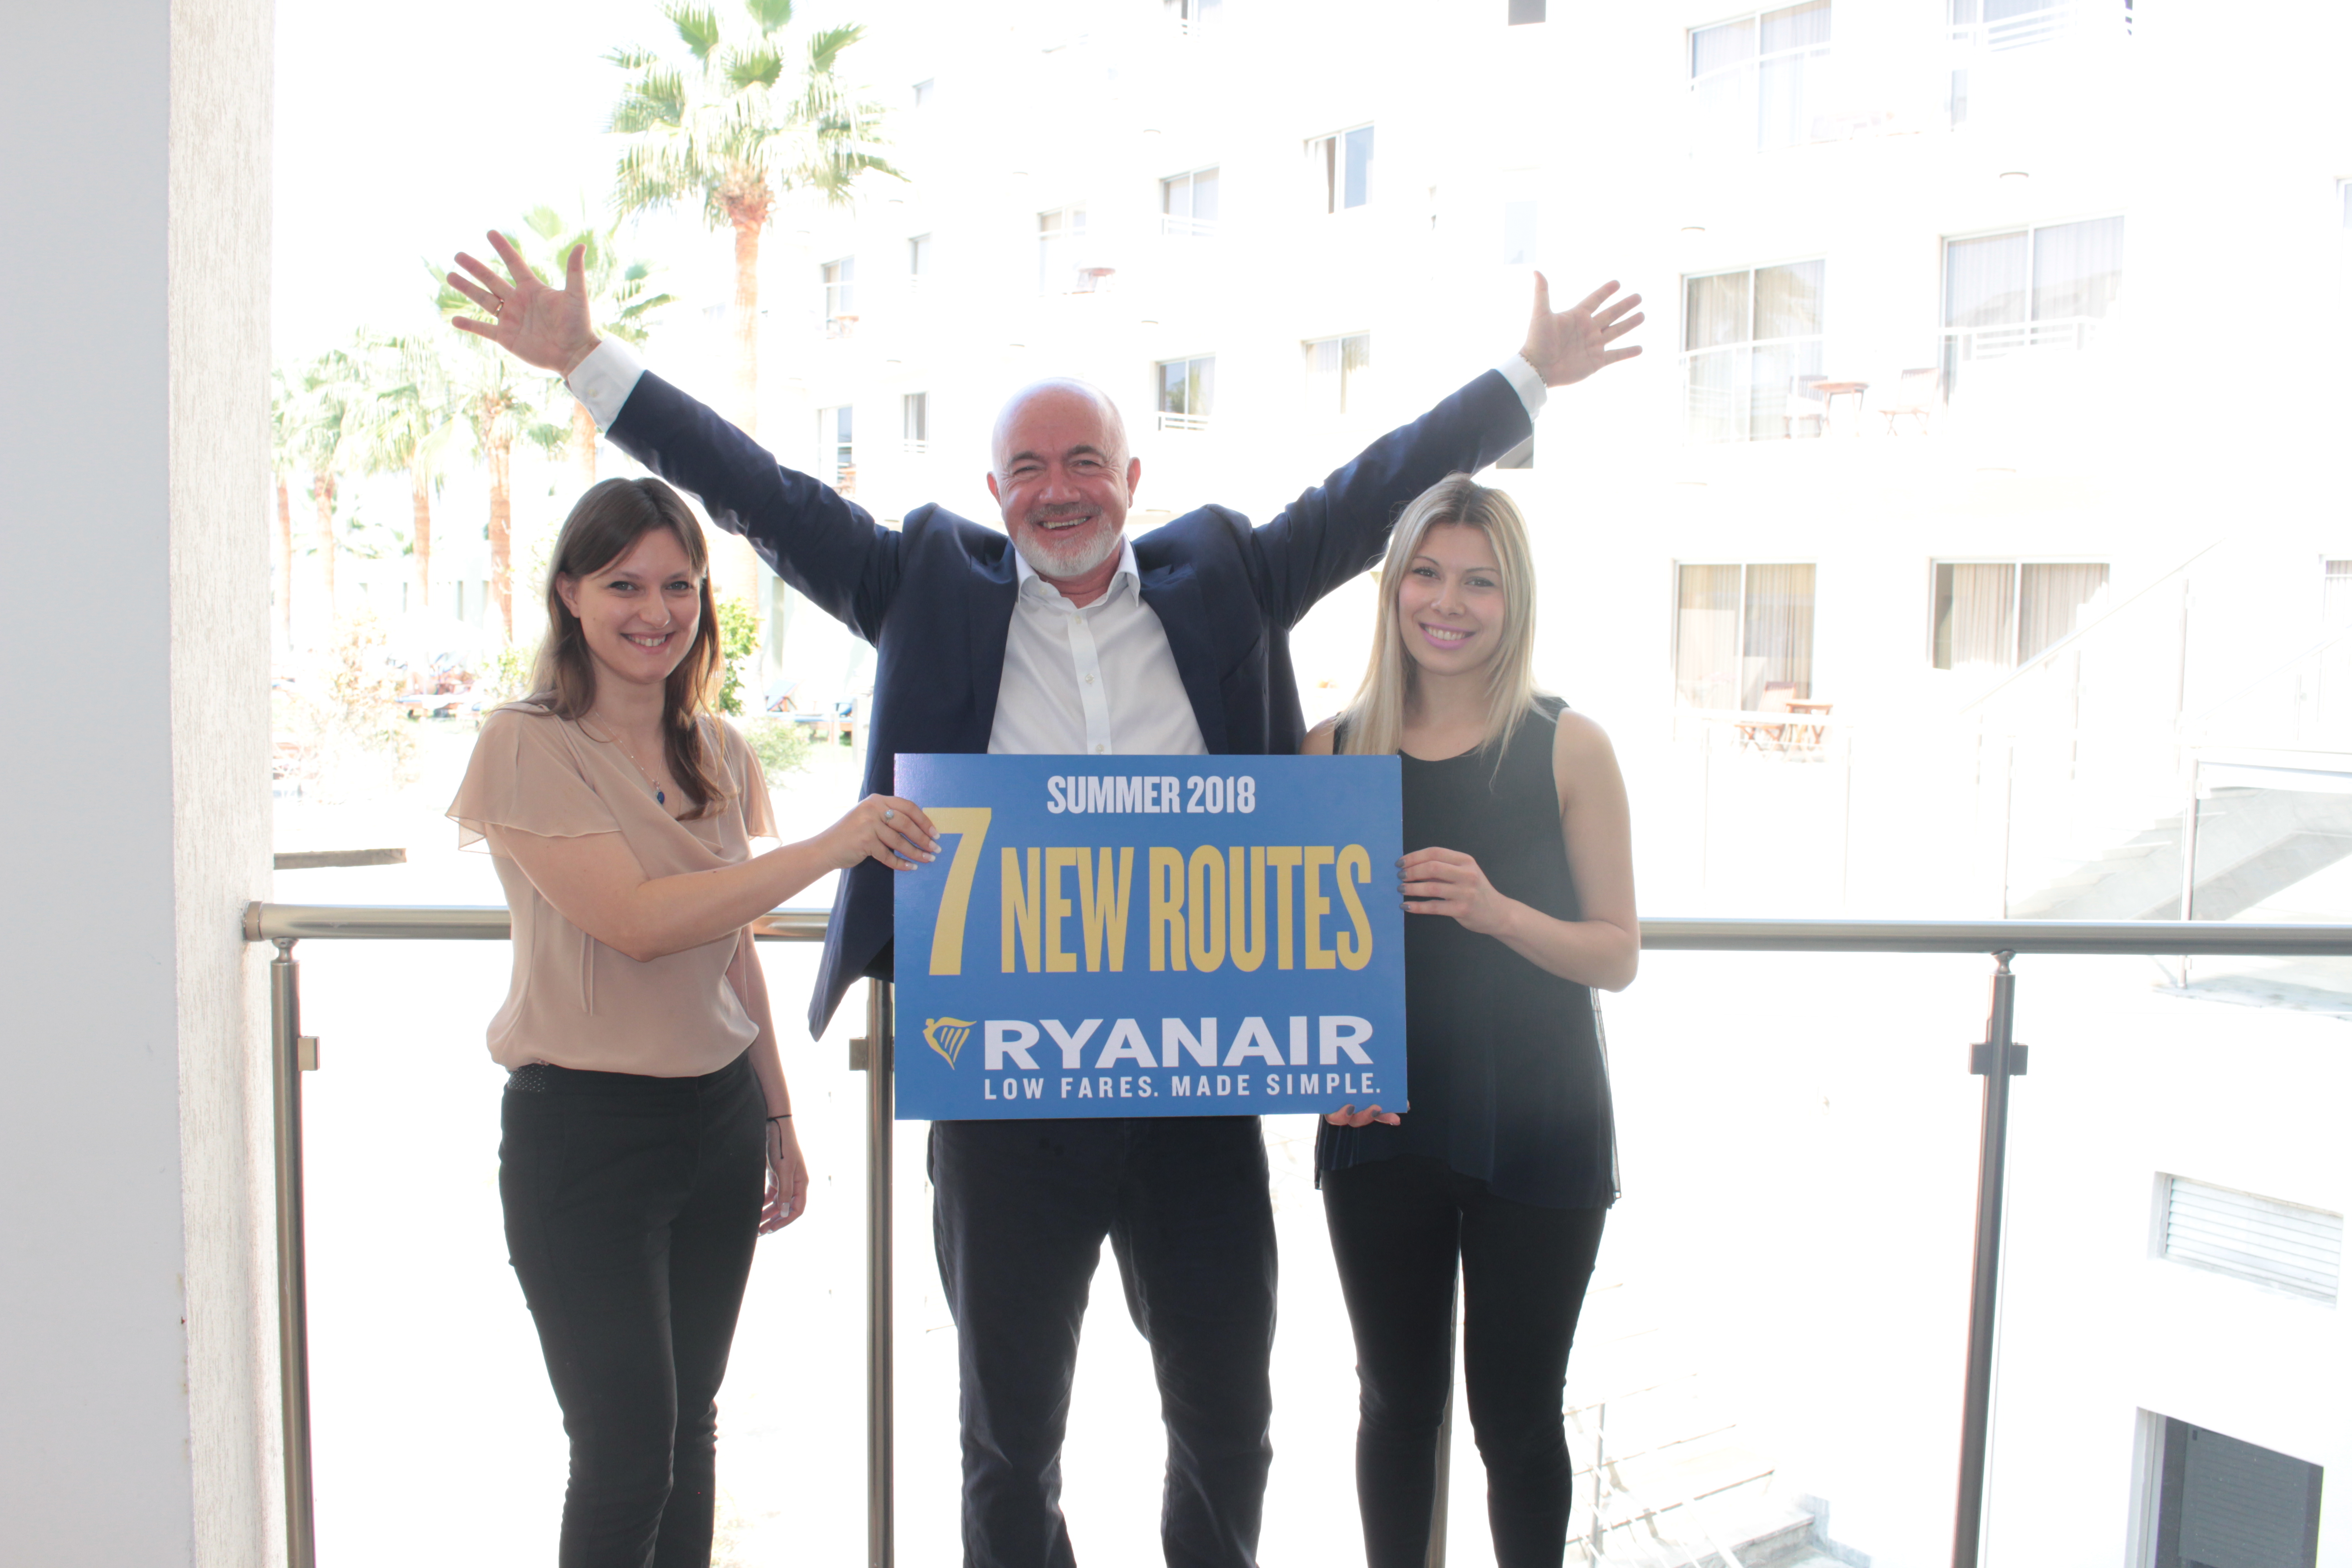 RYANAIR LAUNCHES NEW BUDAPEST ROUTE TO PAPHOS